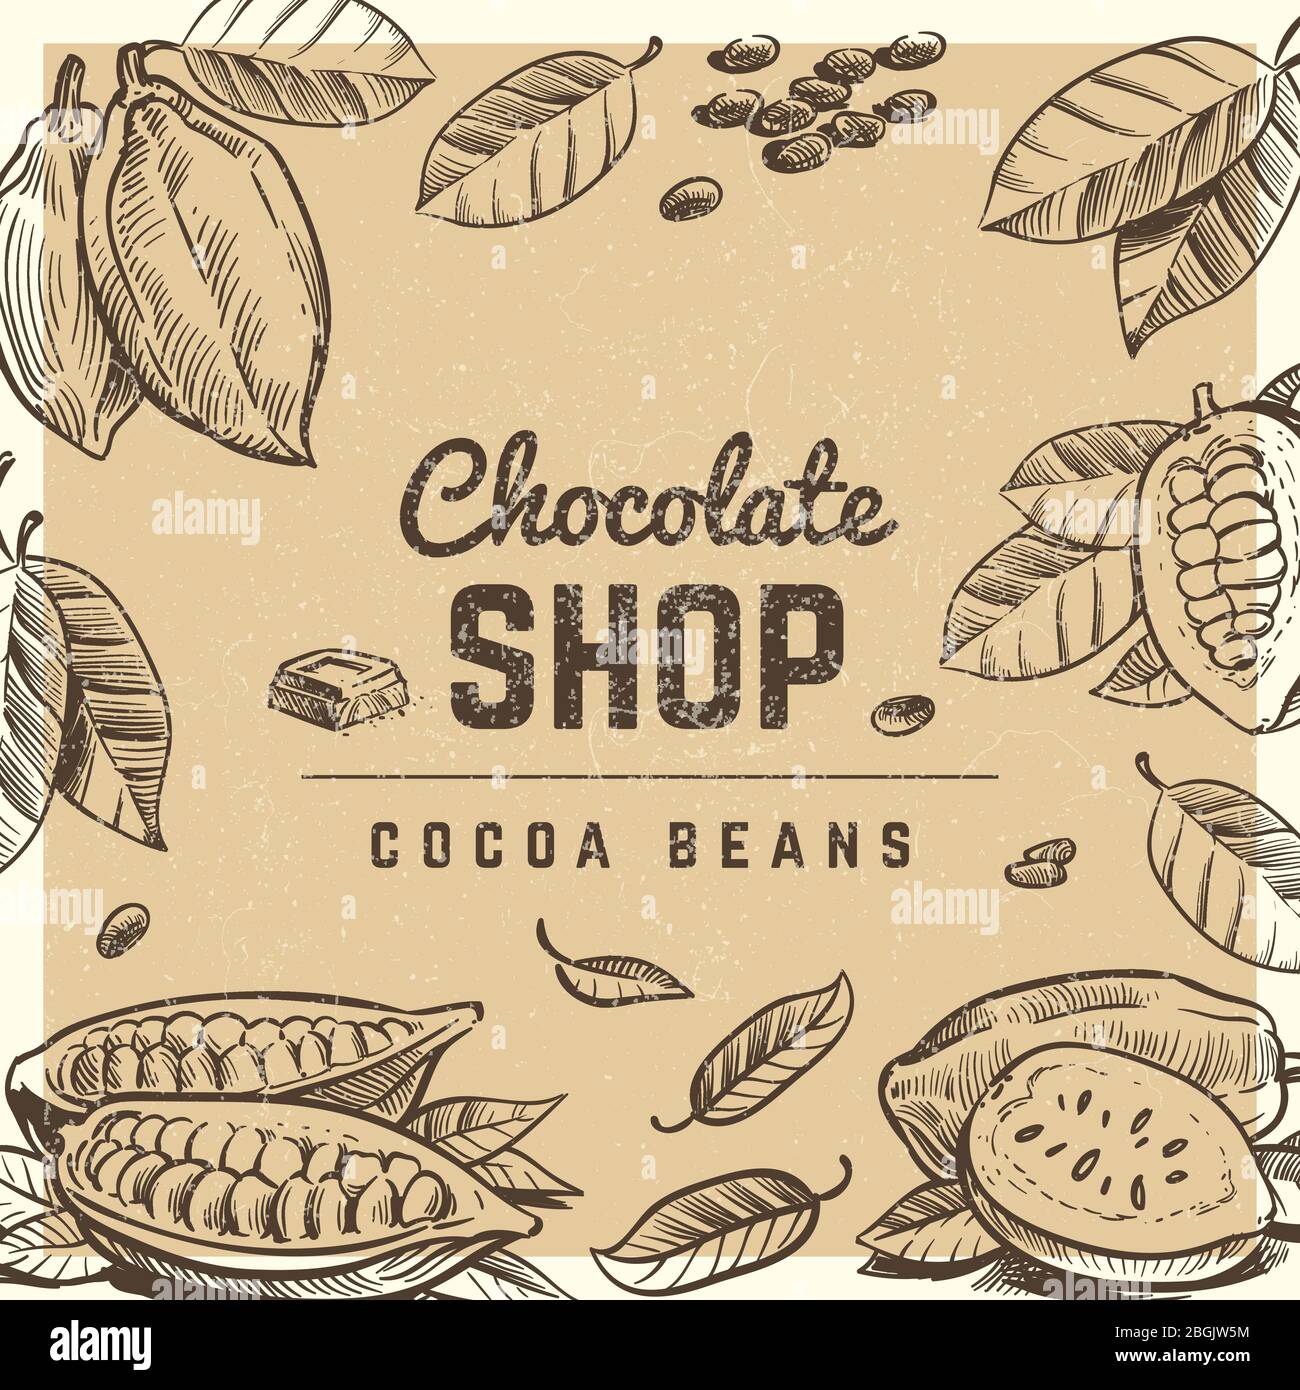 Chocolate shop vintage poster and banner design with sketched chocolate bar and cocoa beans illustration vector Stock Vector